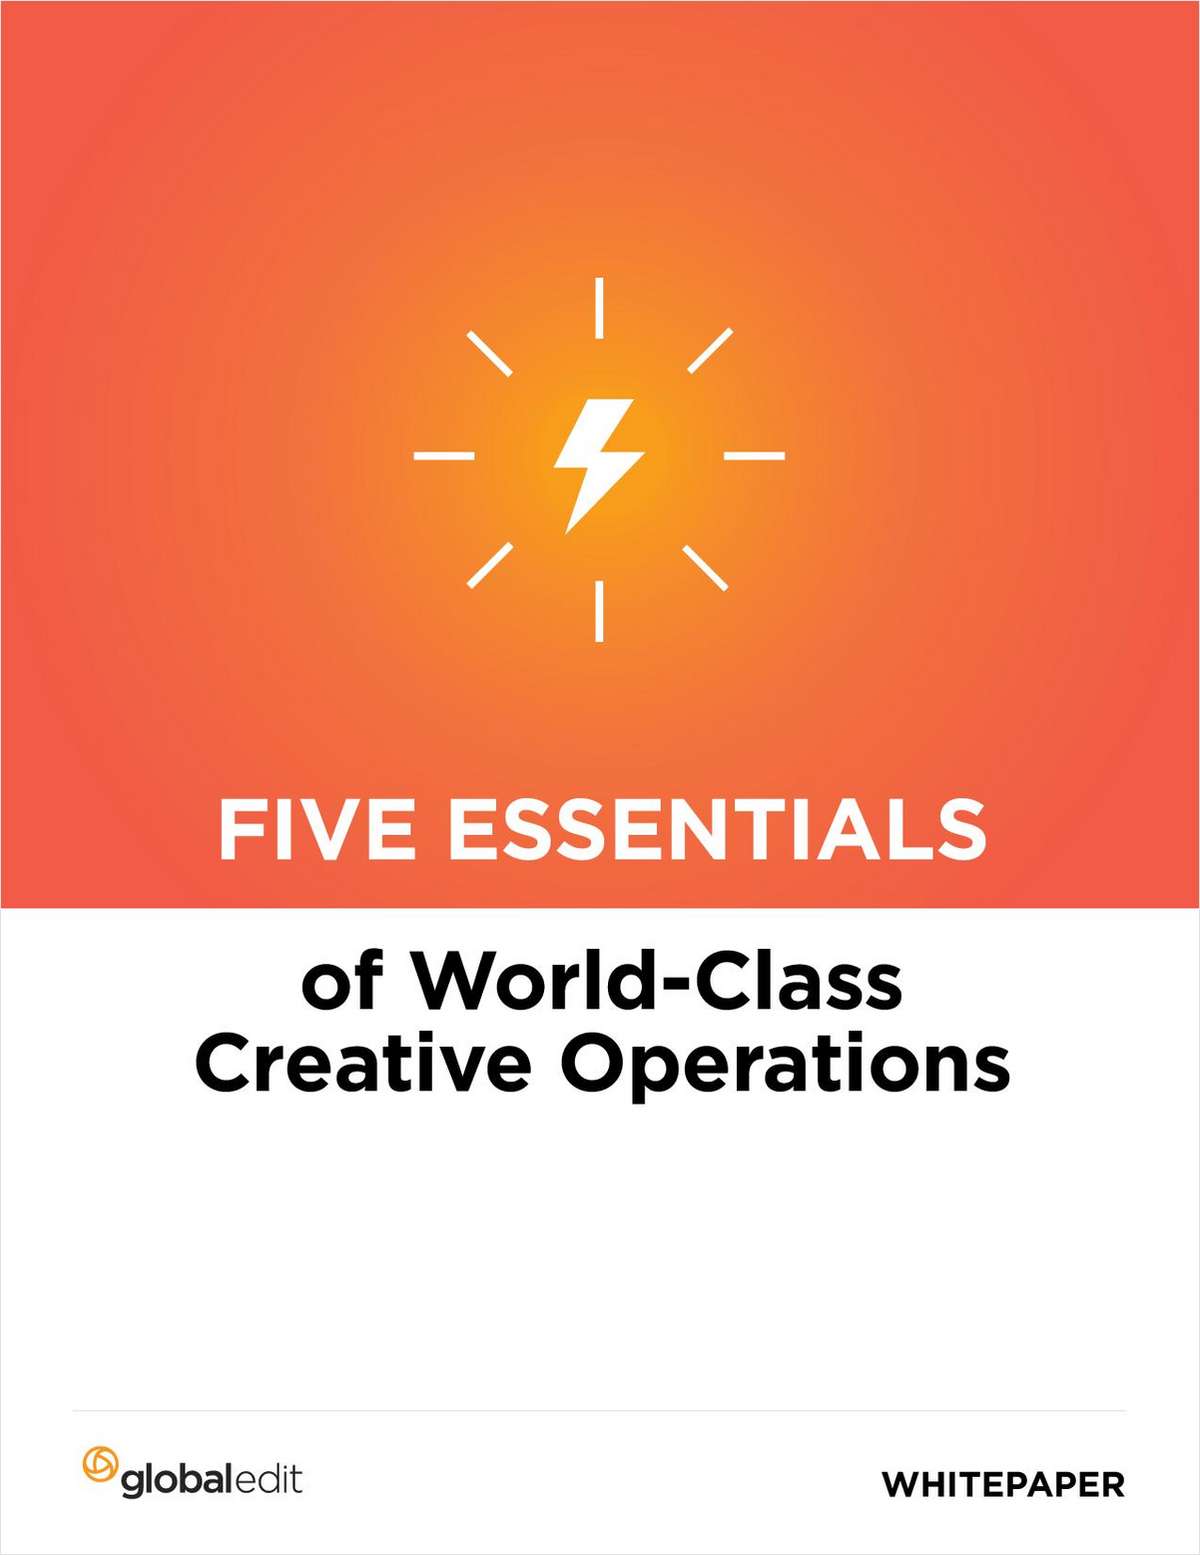 Improve Results with World Class Creative Operations